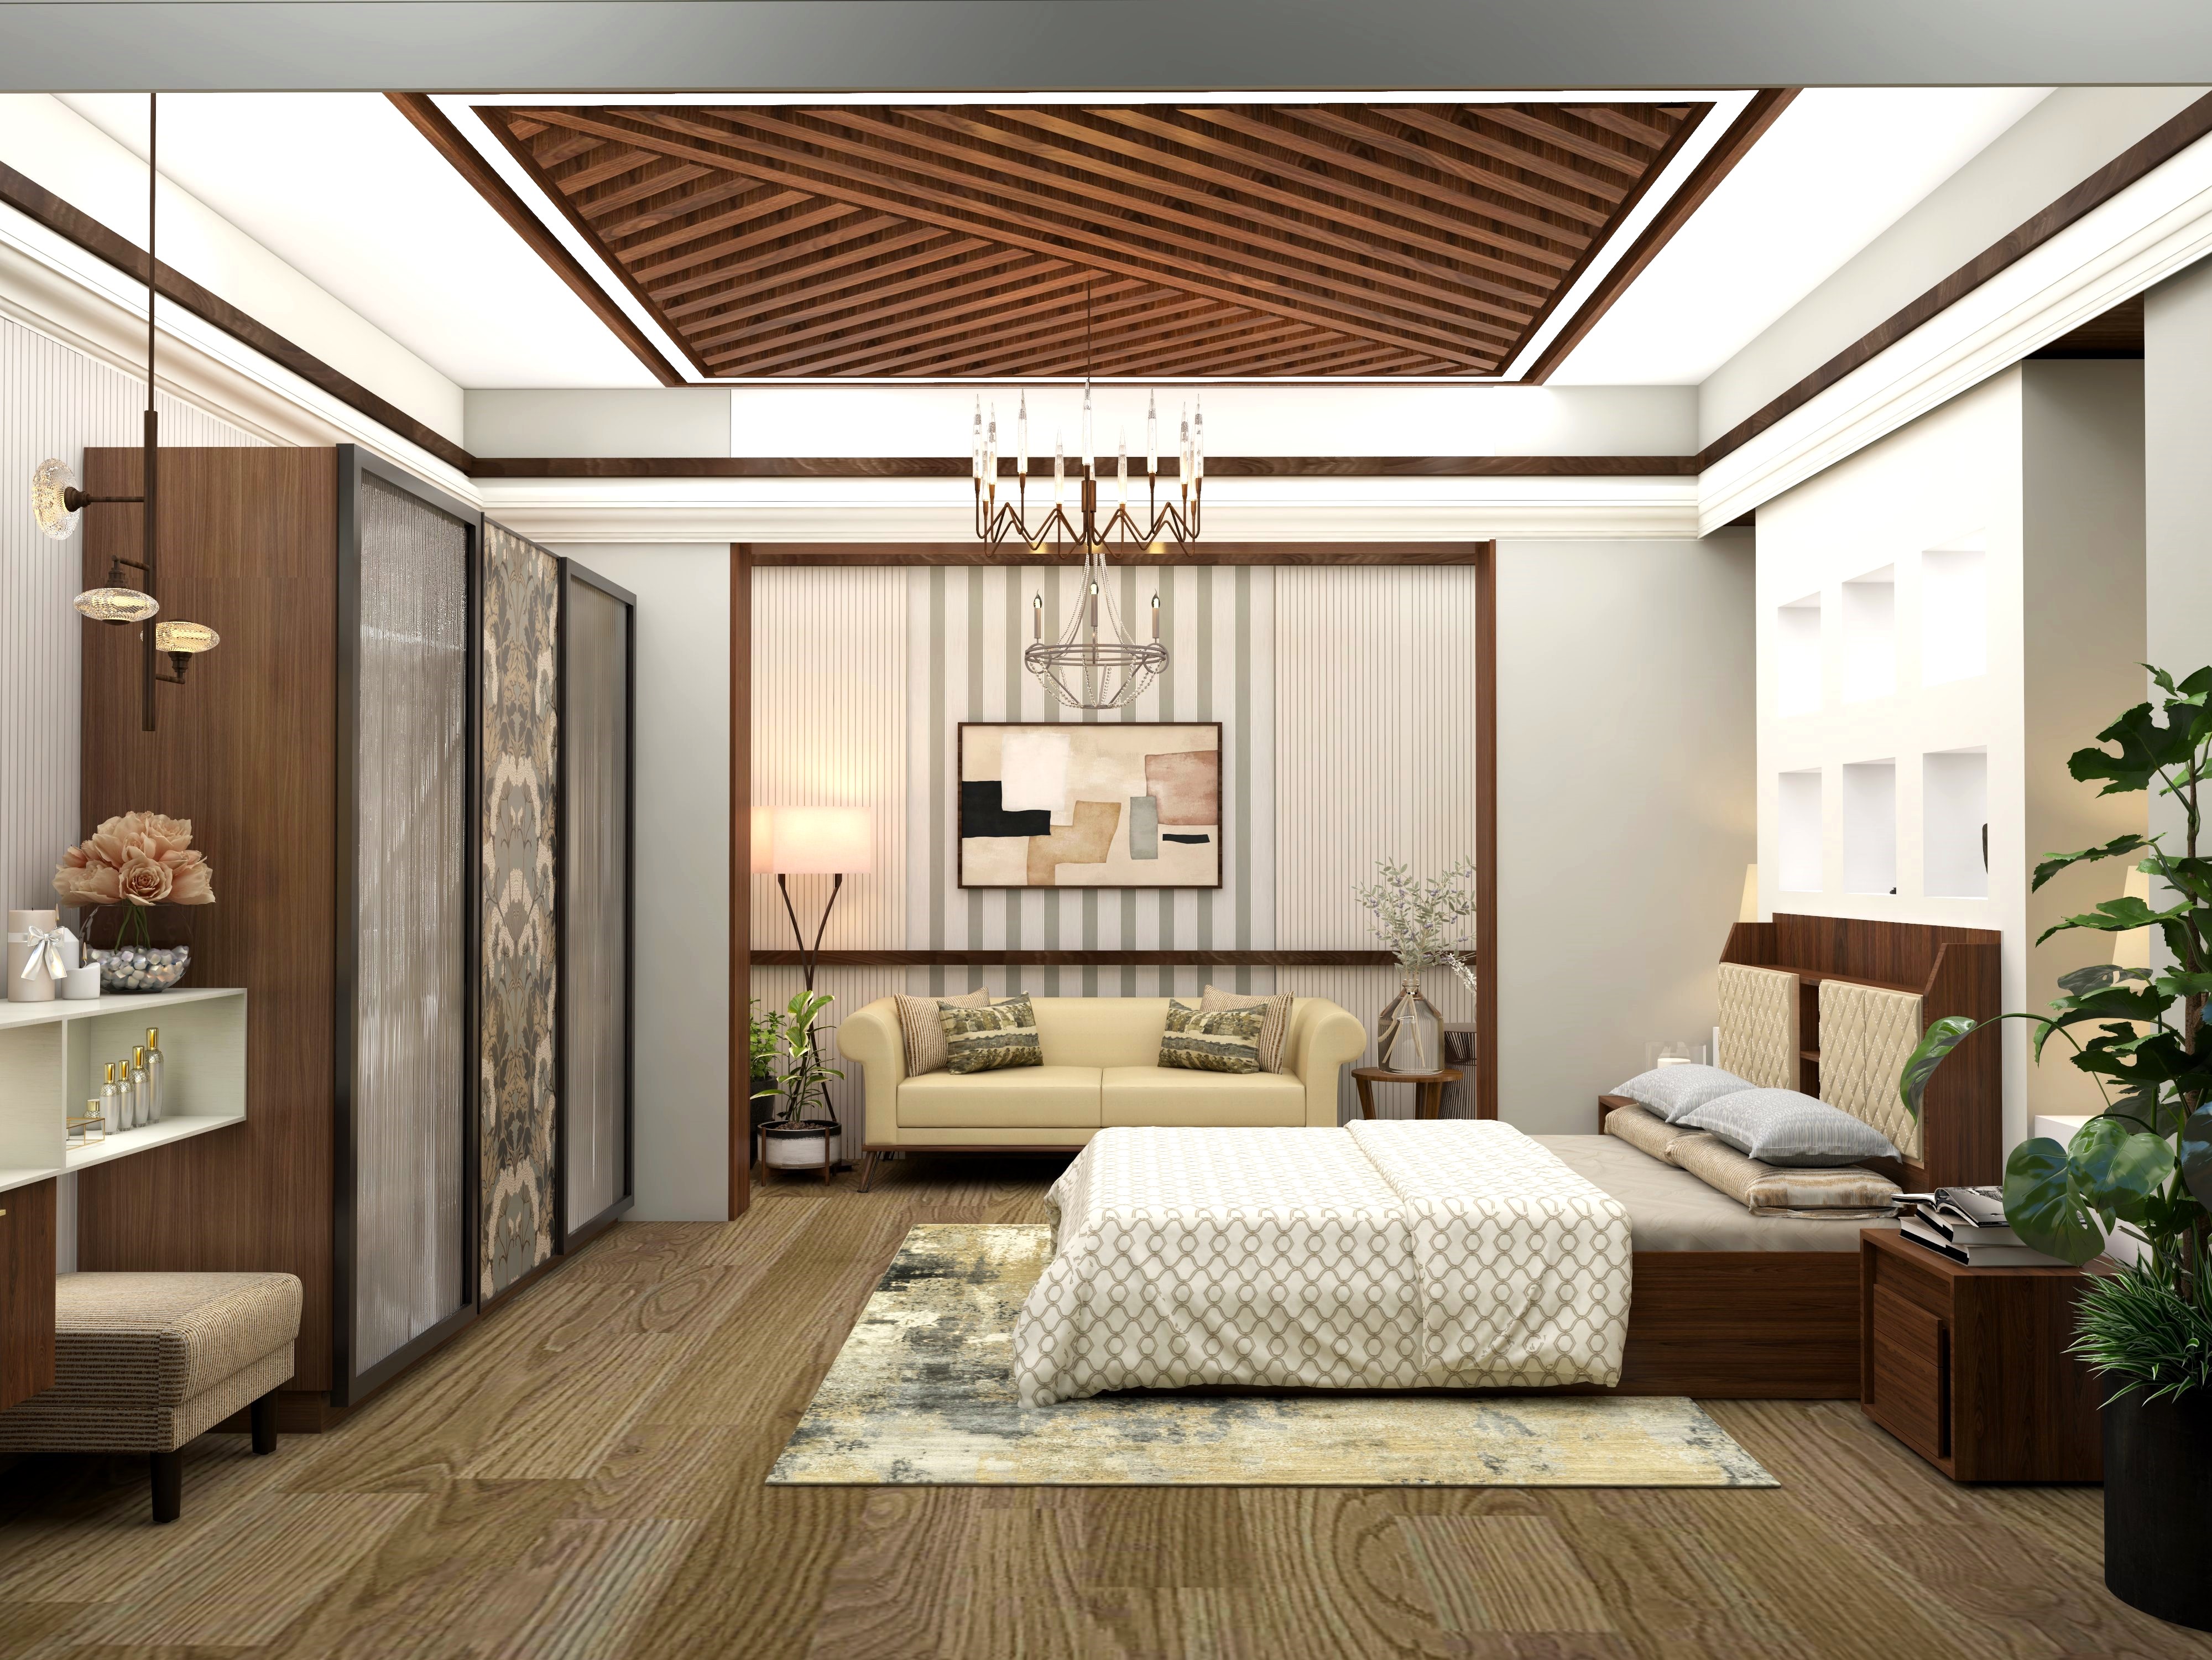 Master bedroom with wooden elements in flooring and ceiling-Beautiful Homes